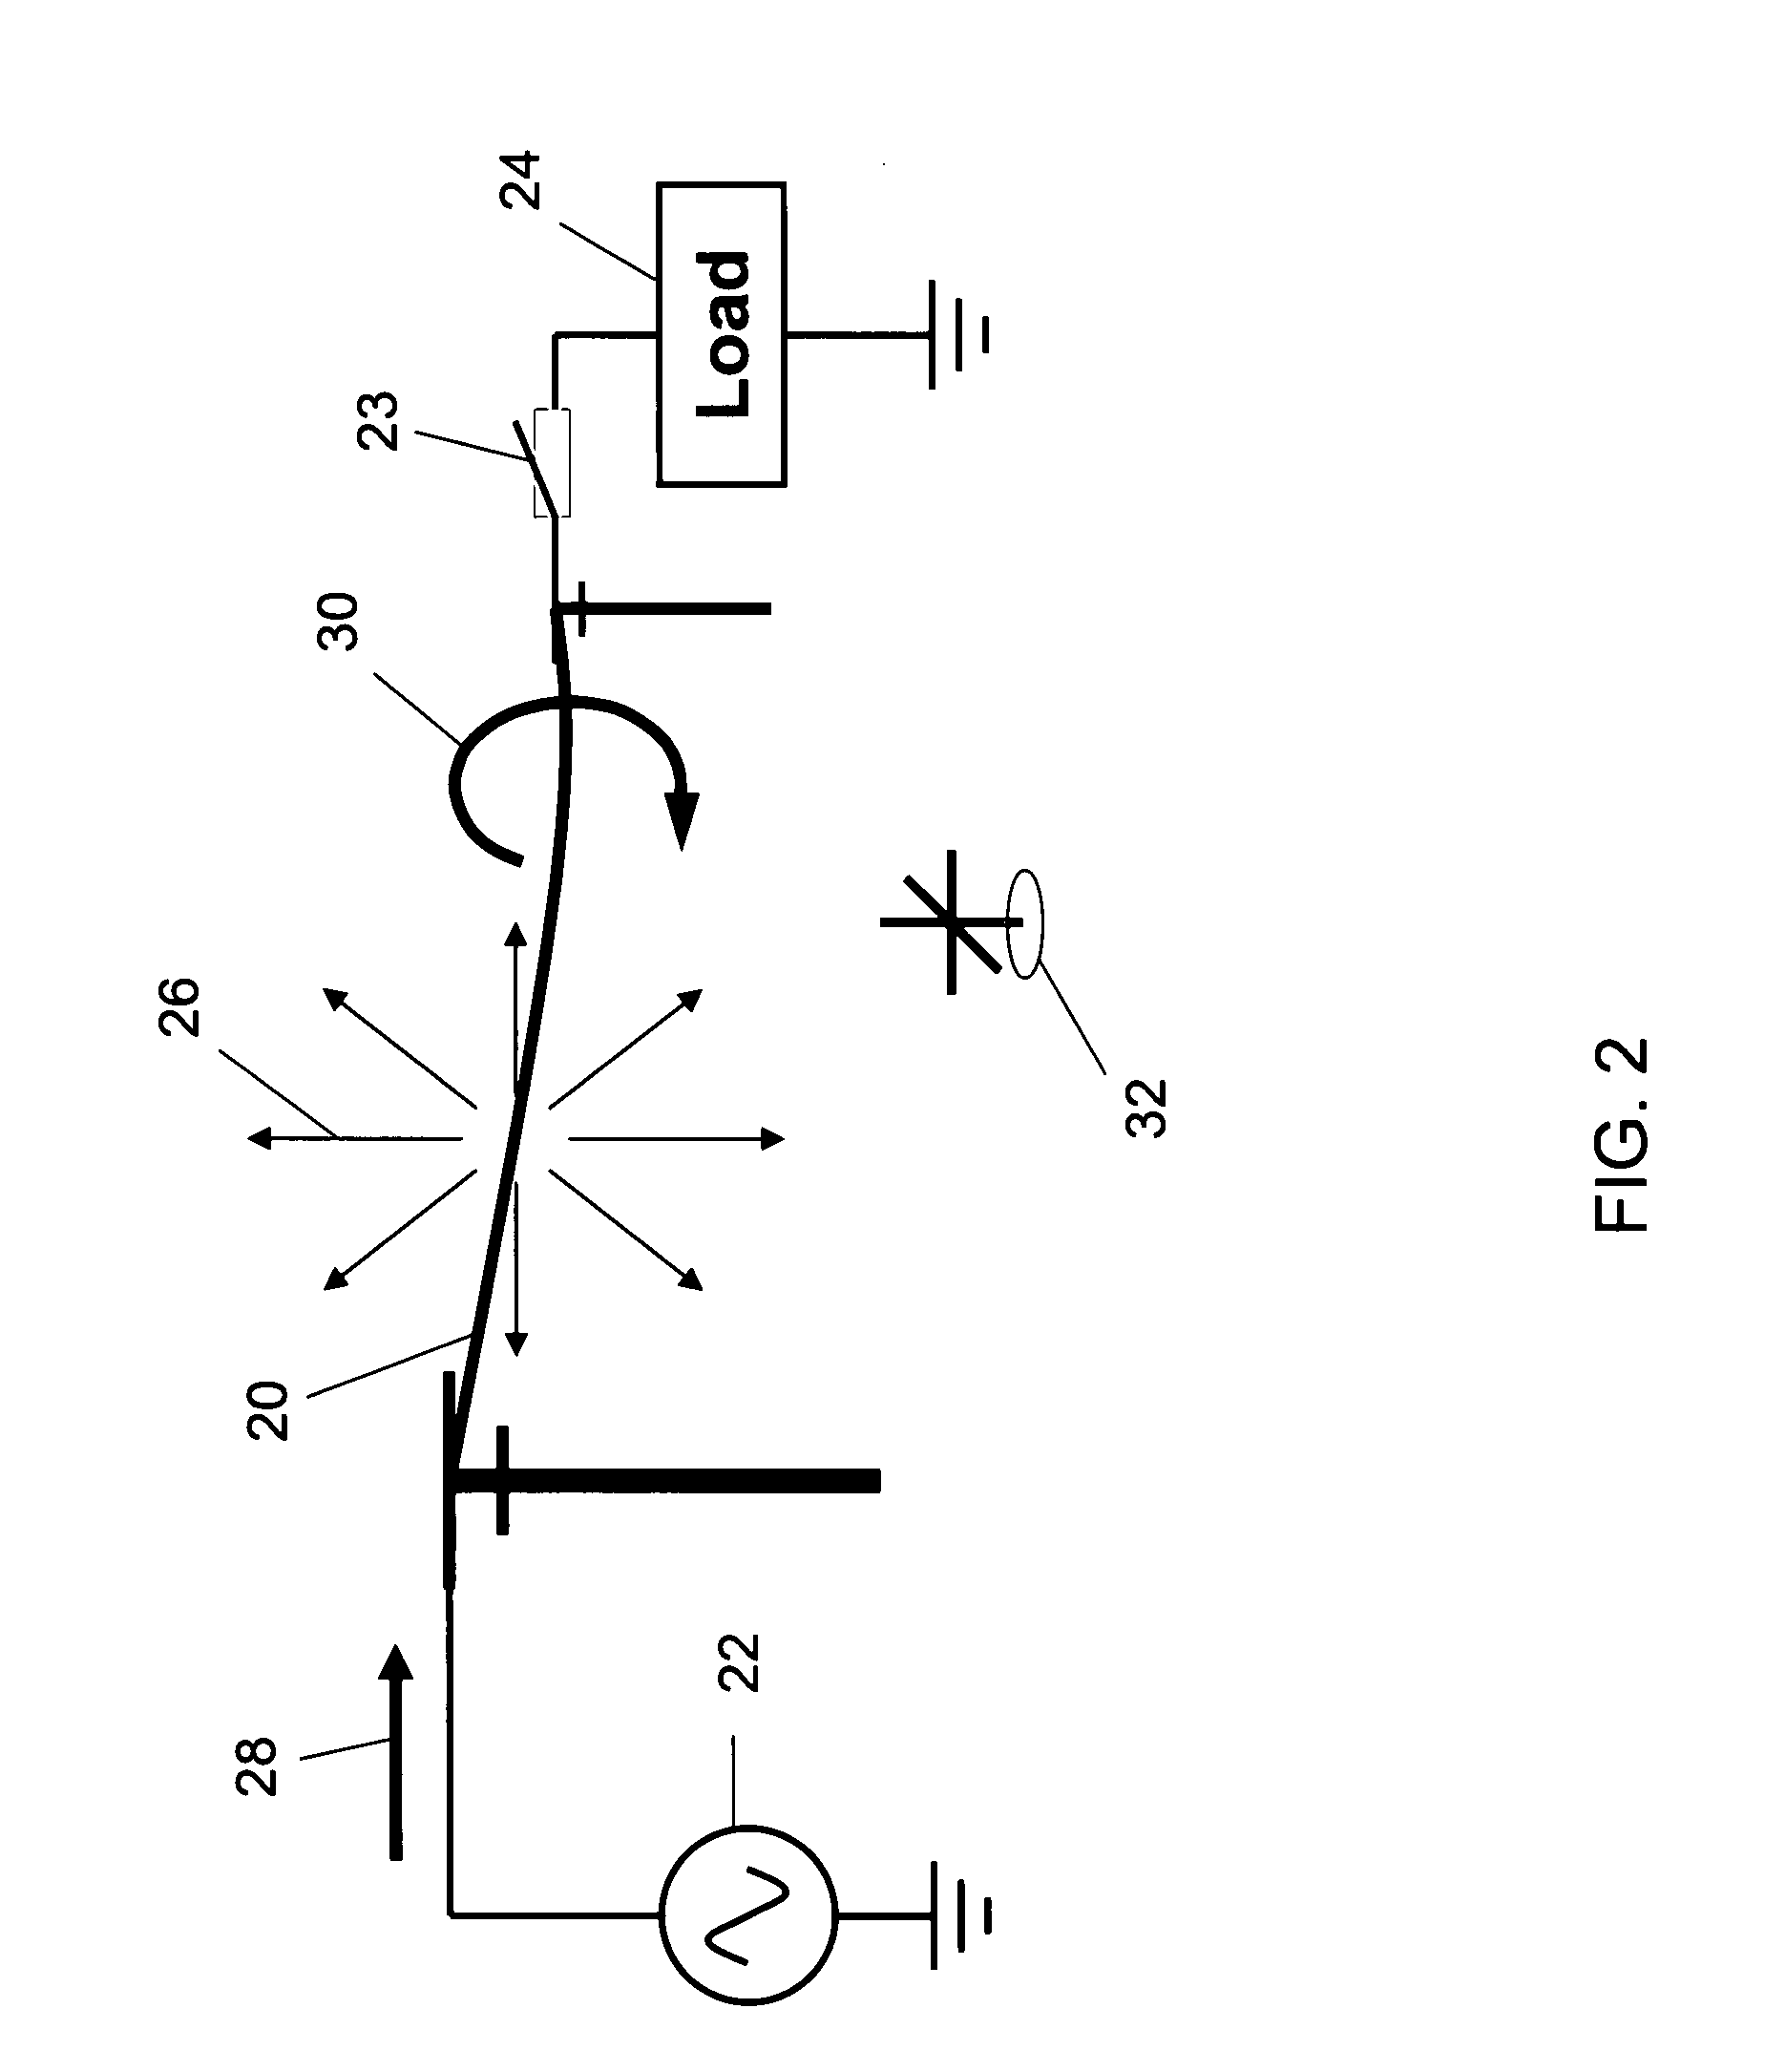 Methods for detecting and classifying loads on AC lines